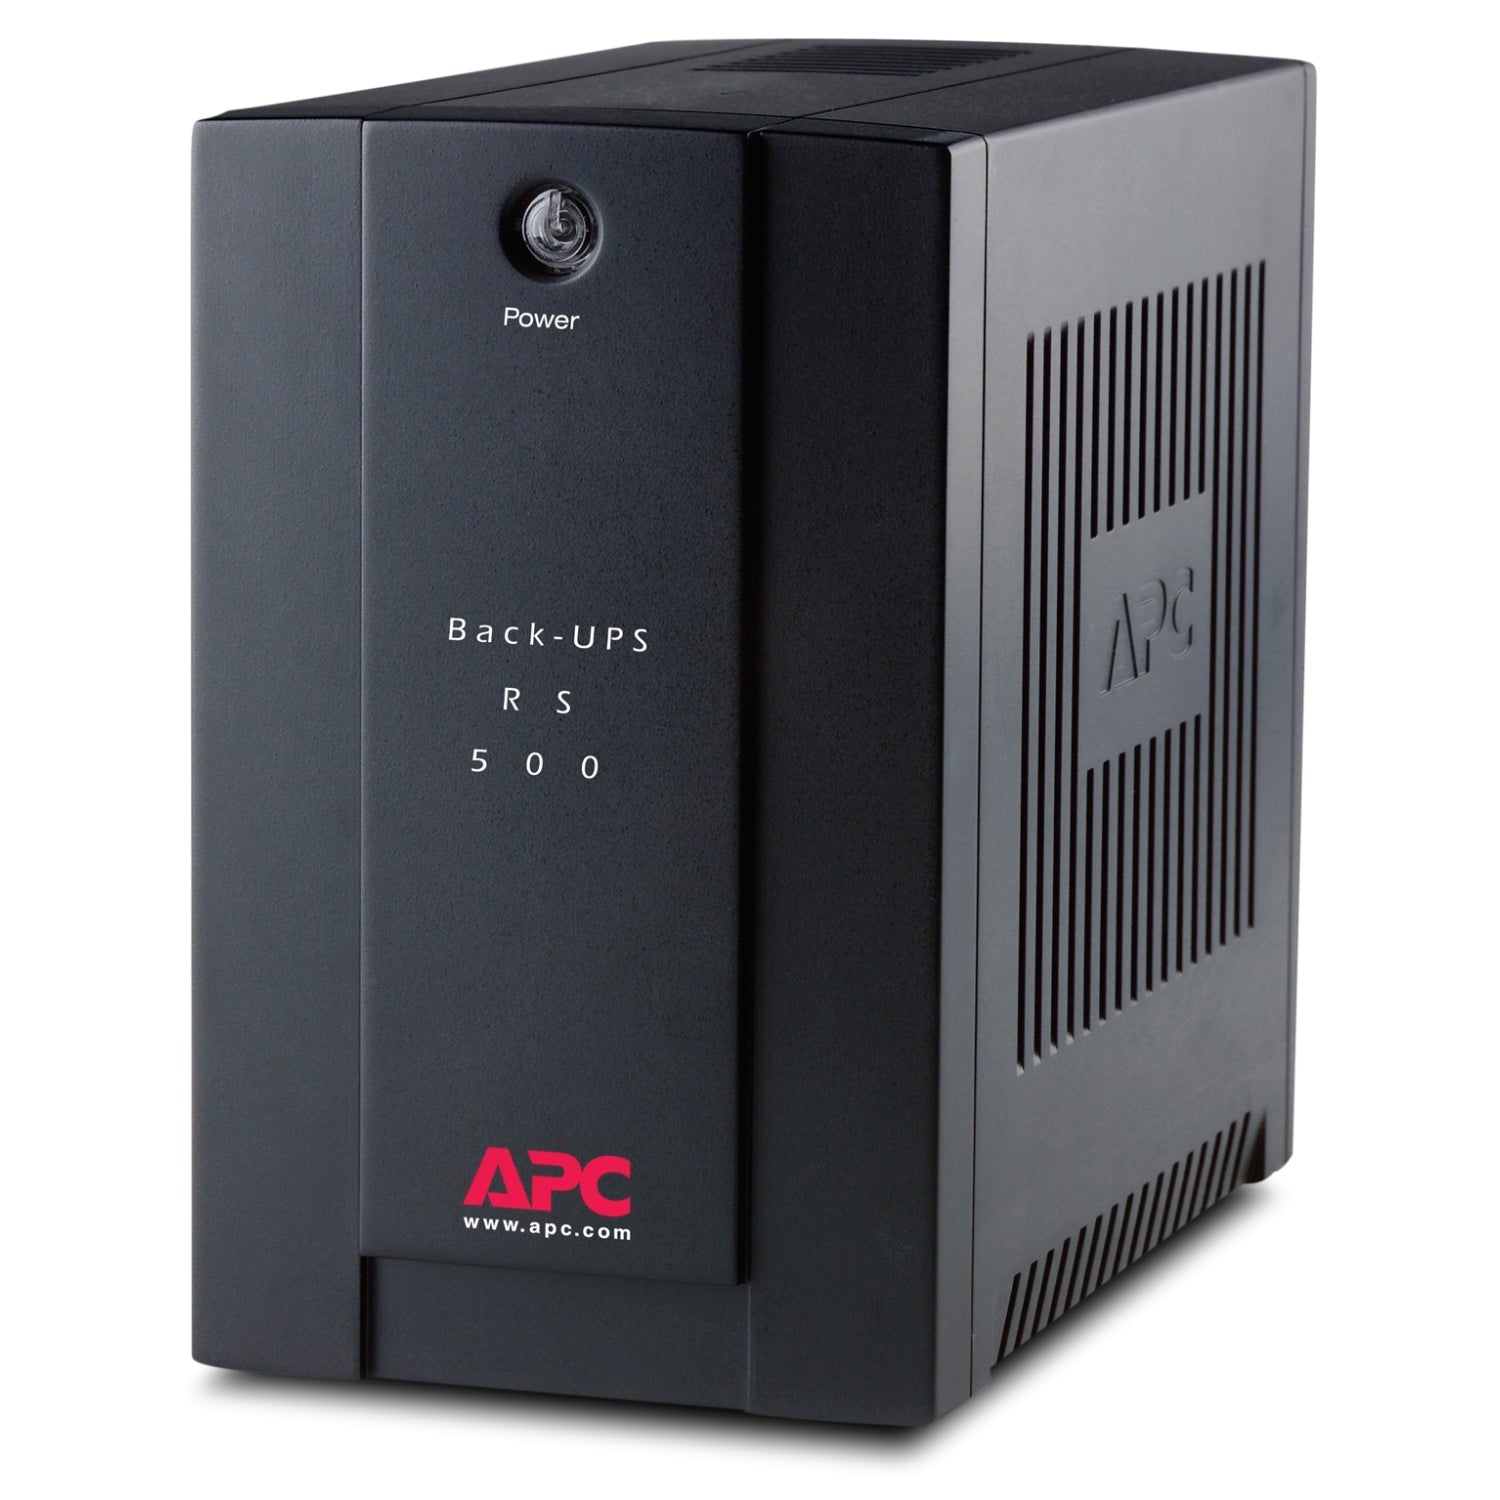 APC Back-UPS, 500VA/300W, Tower, 230V, 3x IEC C13 outlets, AVR, LED, User Replaceable Battery